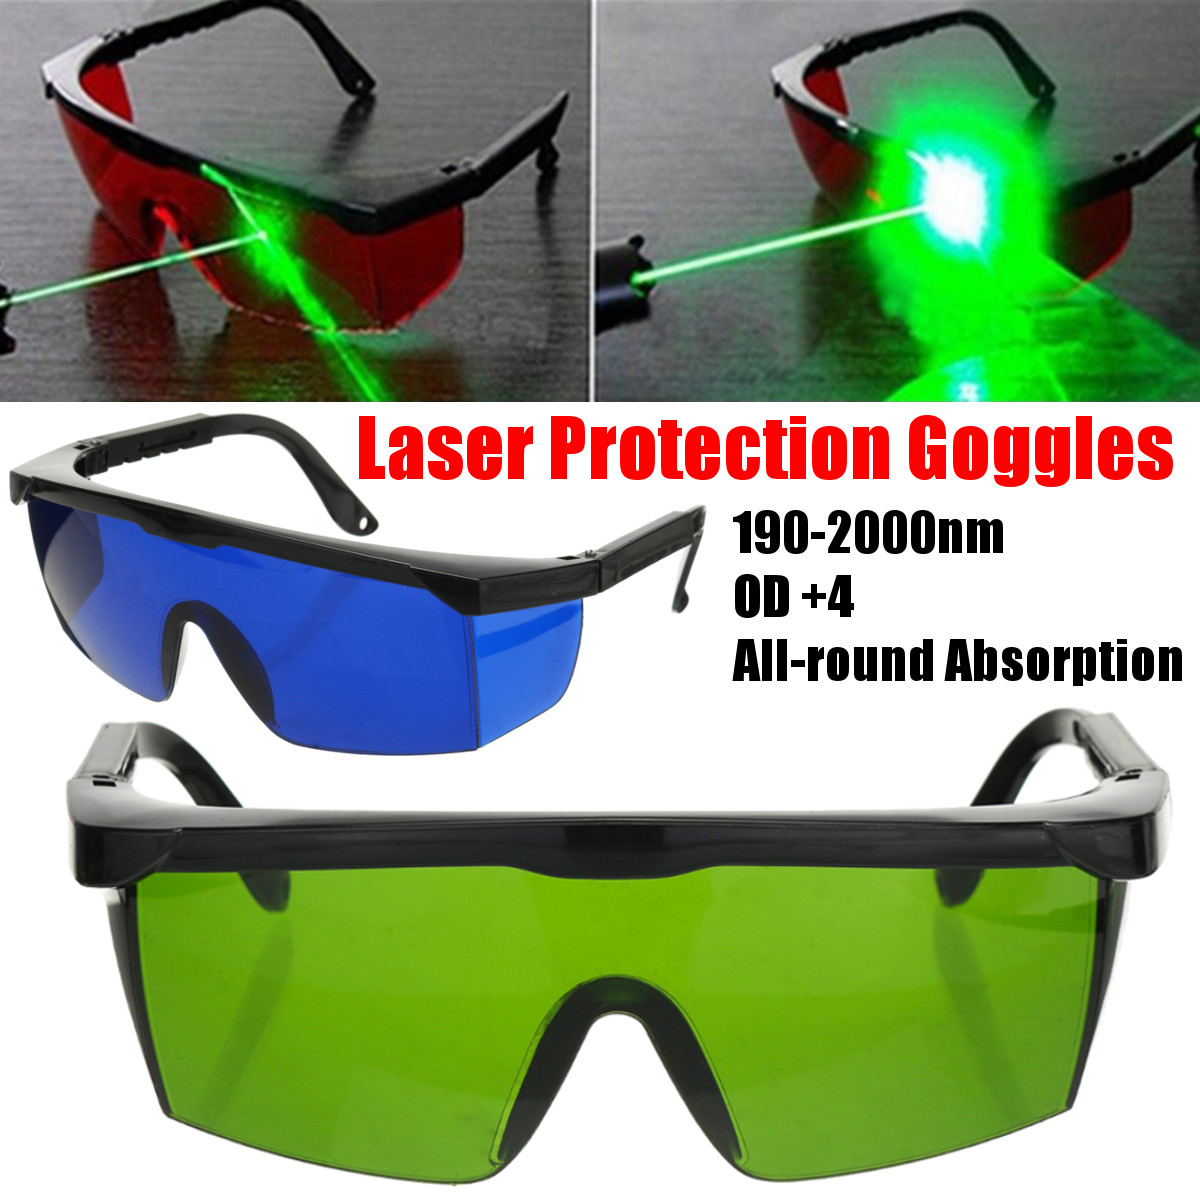 Safety Protection Goggles Laser Safety Glasses Eye Spectacles Protective Glasses 